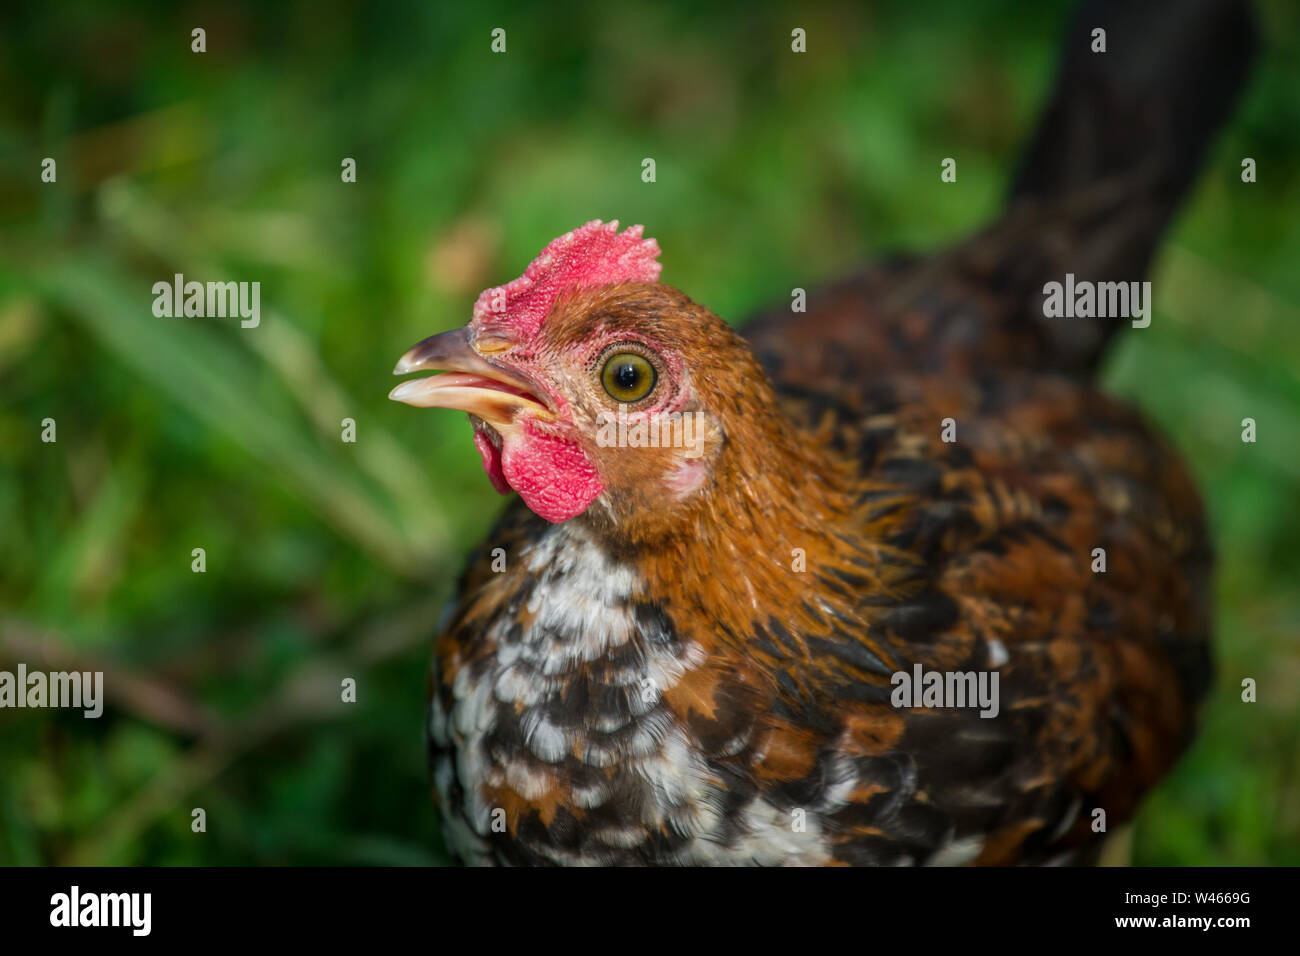 Chicken drinking water, Stoapiperl / Steinhendl, a critically endangered chicken breed from Austria Stock Photo